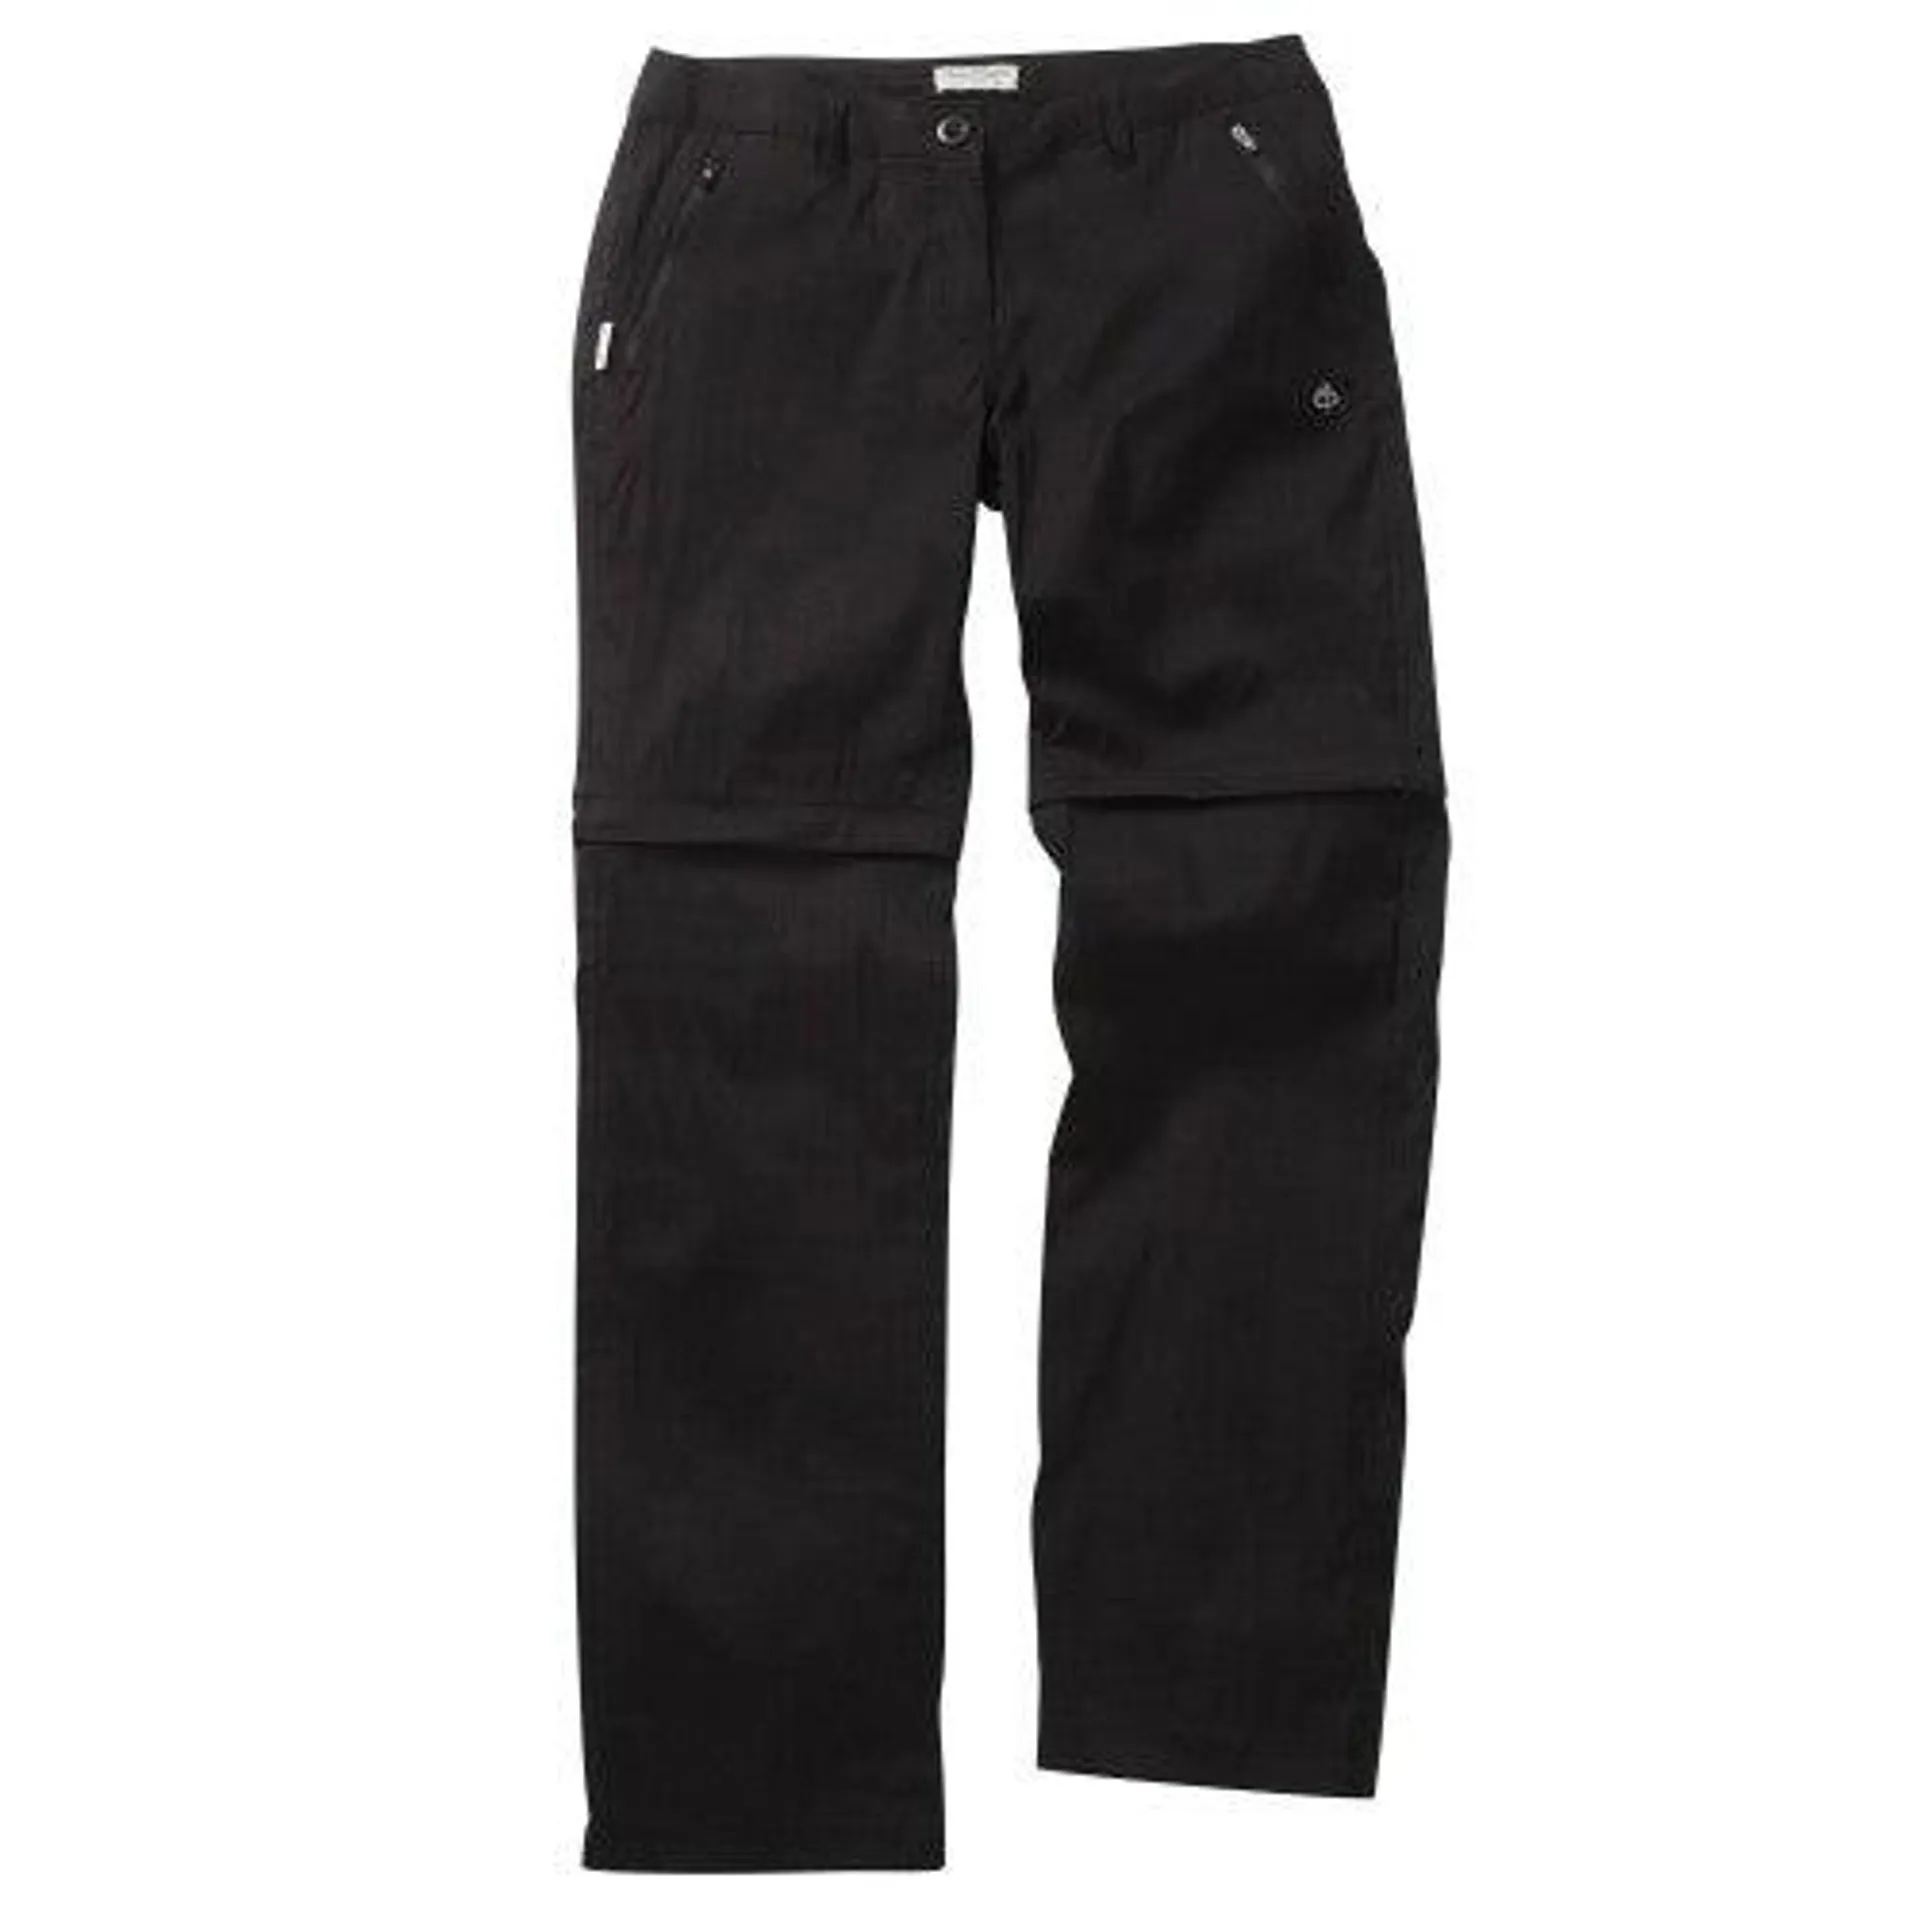 Craghoppers Outdoor Womens/Ladies Kiwi Pro Convertible Trousers